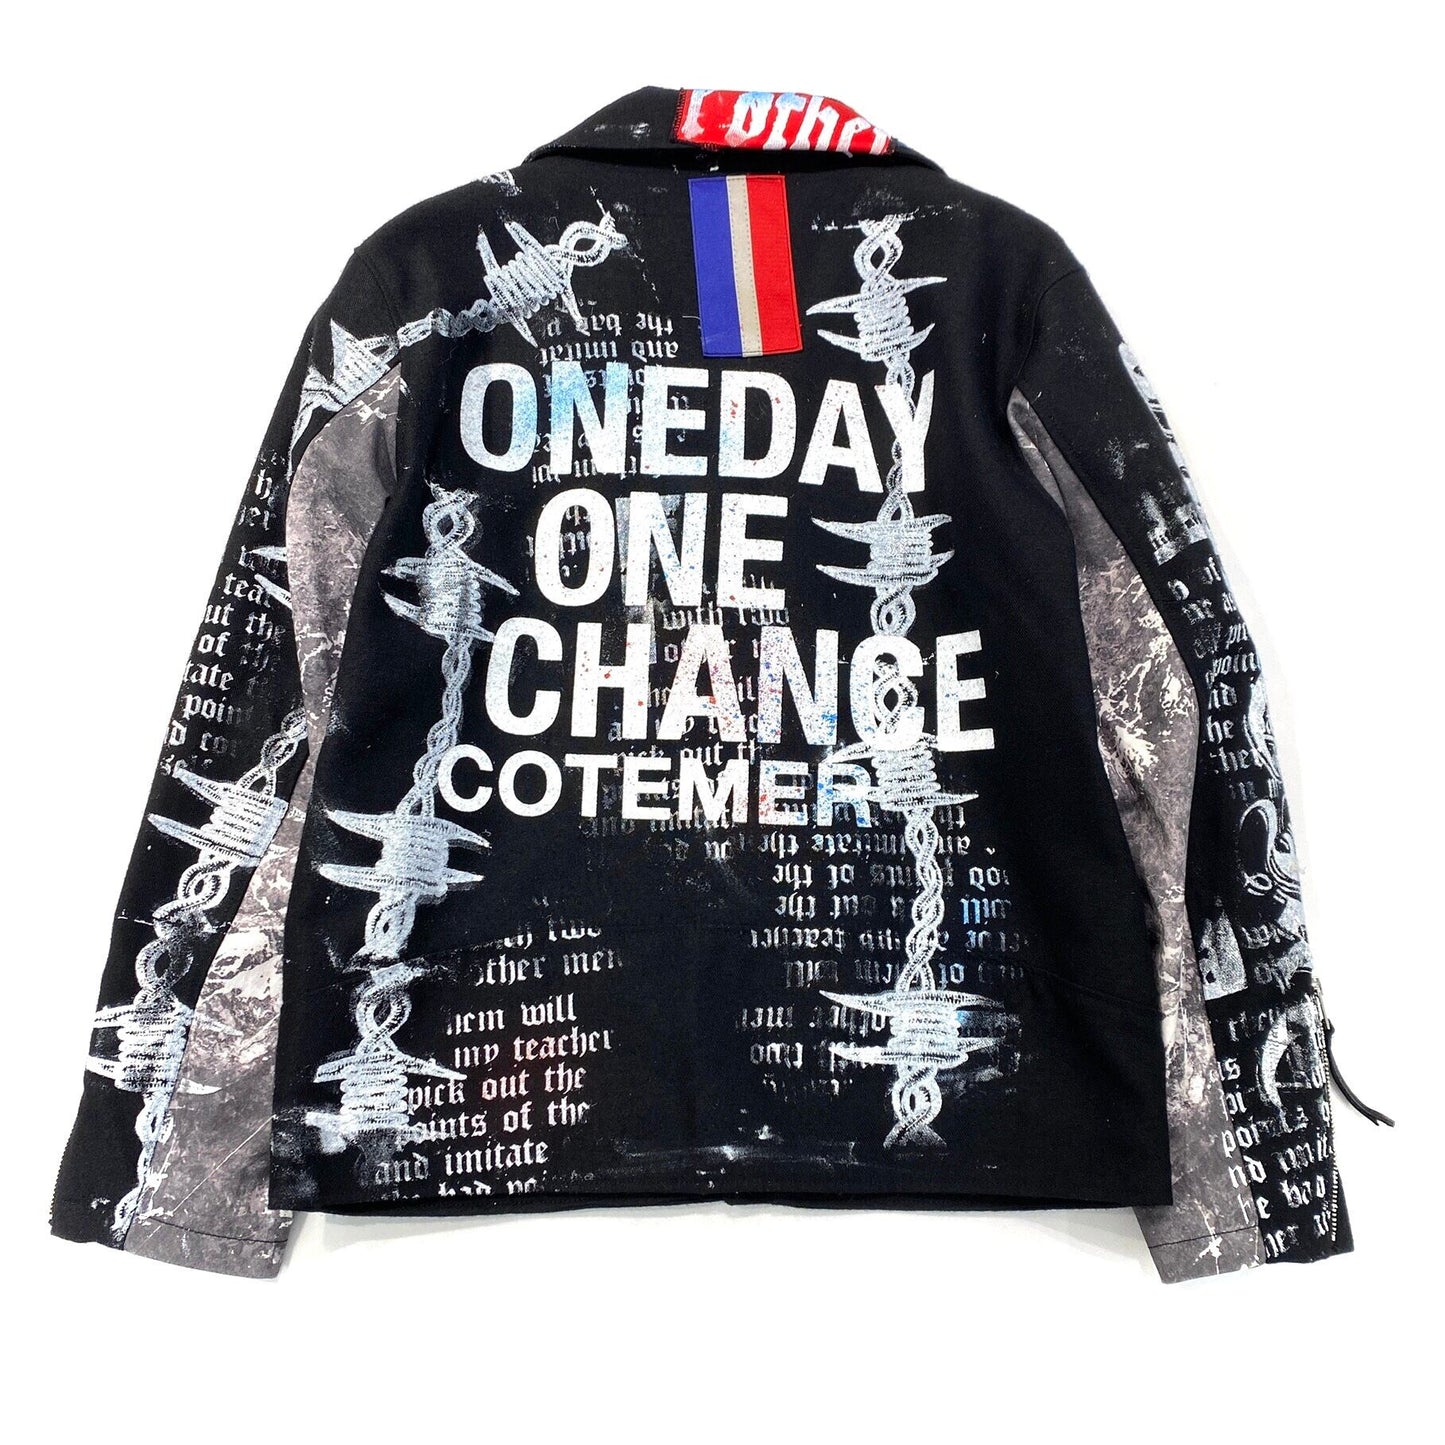 ONE OK ROCK Band "One Day One Chance" Bespoke Hypebeast Japanese Remake Vintage Handmade Custom One and Only One Cote Mer Wagara Upcycle Sustainable Street Fashion Remake Paint  Graffiti Wool x Leather Riders Blouson Jacket ( Size : L )